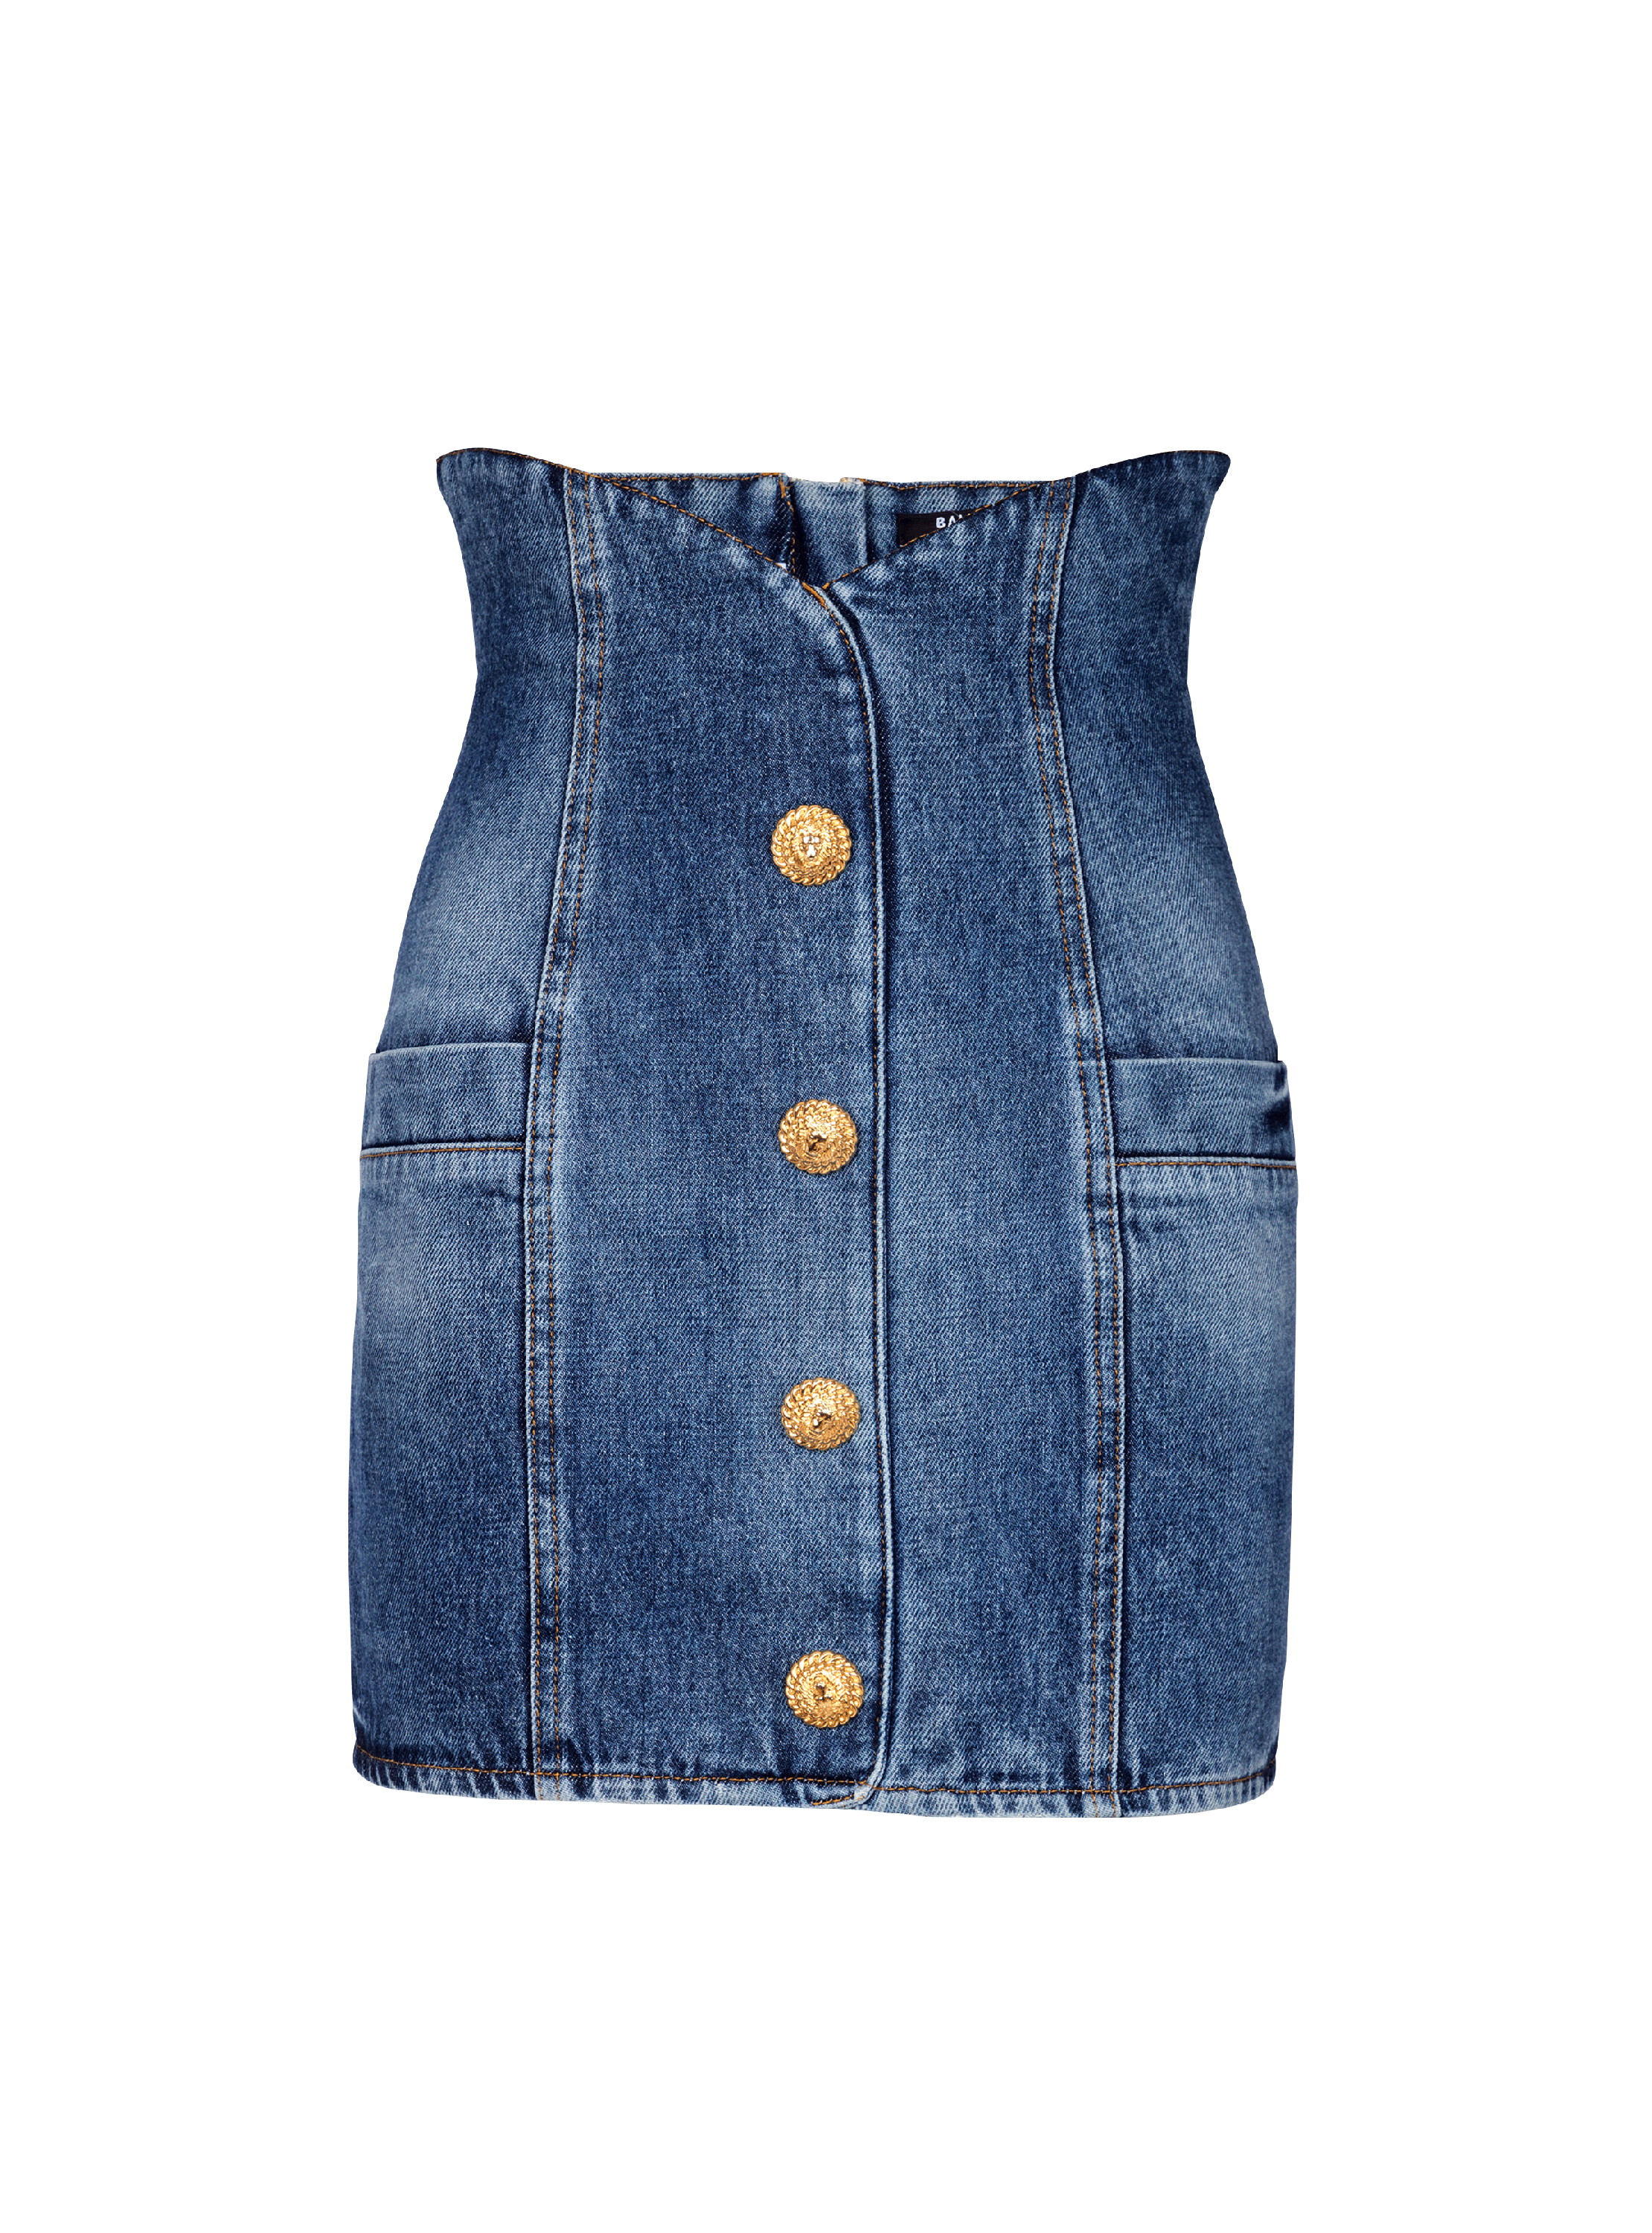 Denim tulip skirt with buttons